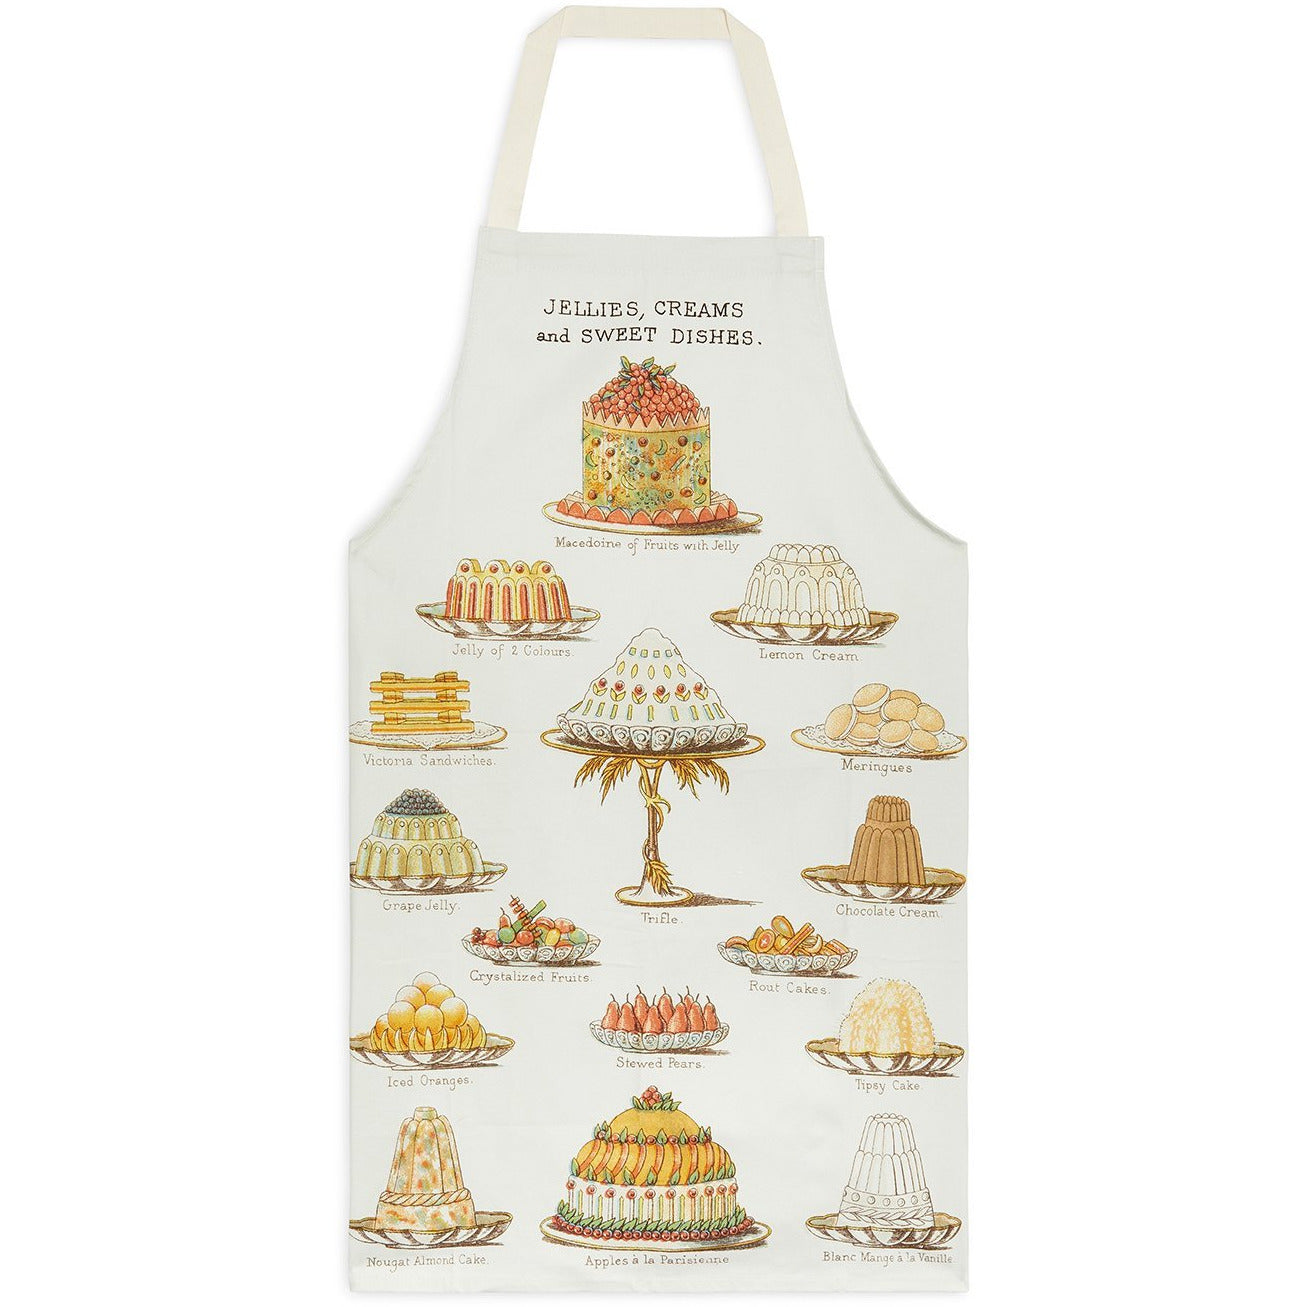 Cotton apron, white background with illustrations of Victorian desserts from Mrs Beeton's Book of Household Management. From the collection of the Cambridge University Library, brought to you by CuratingCambridge.co.uk 